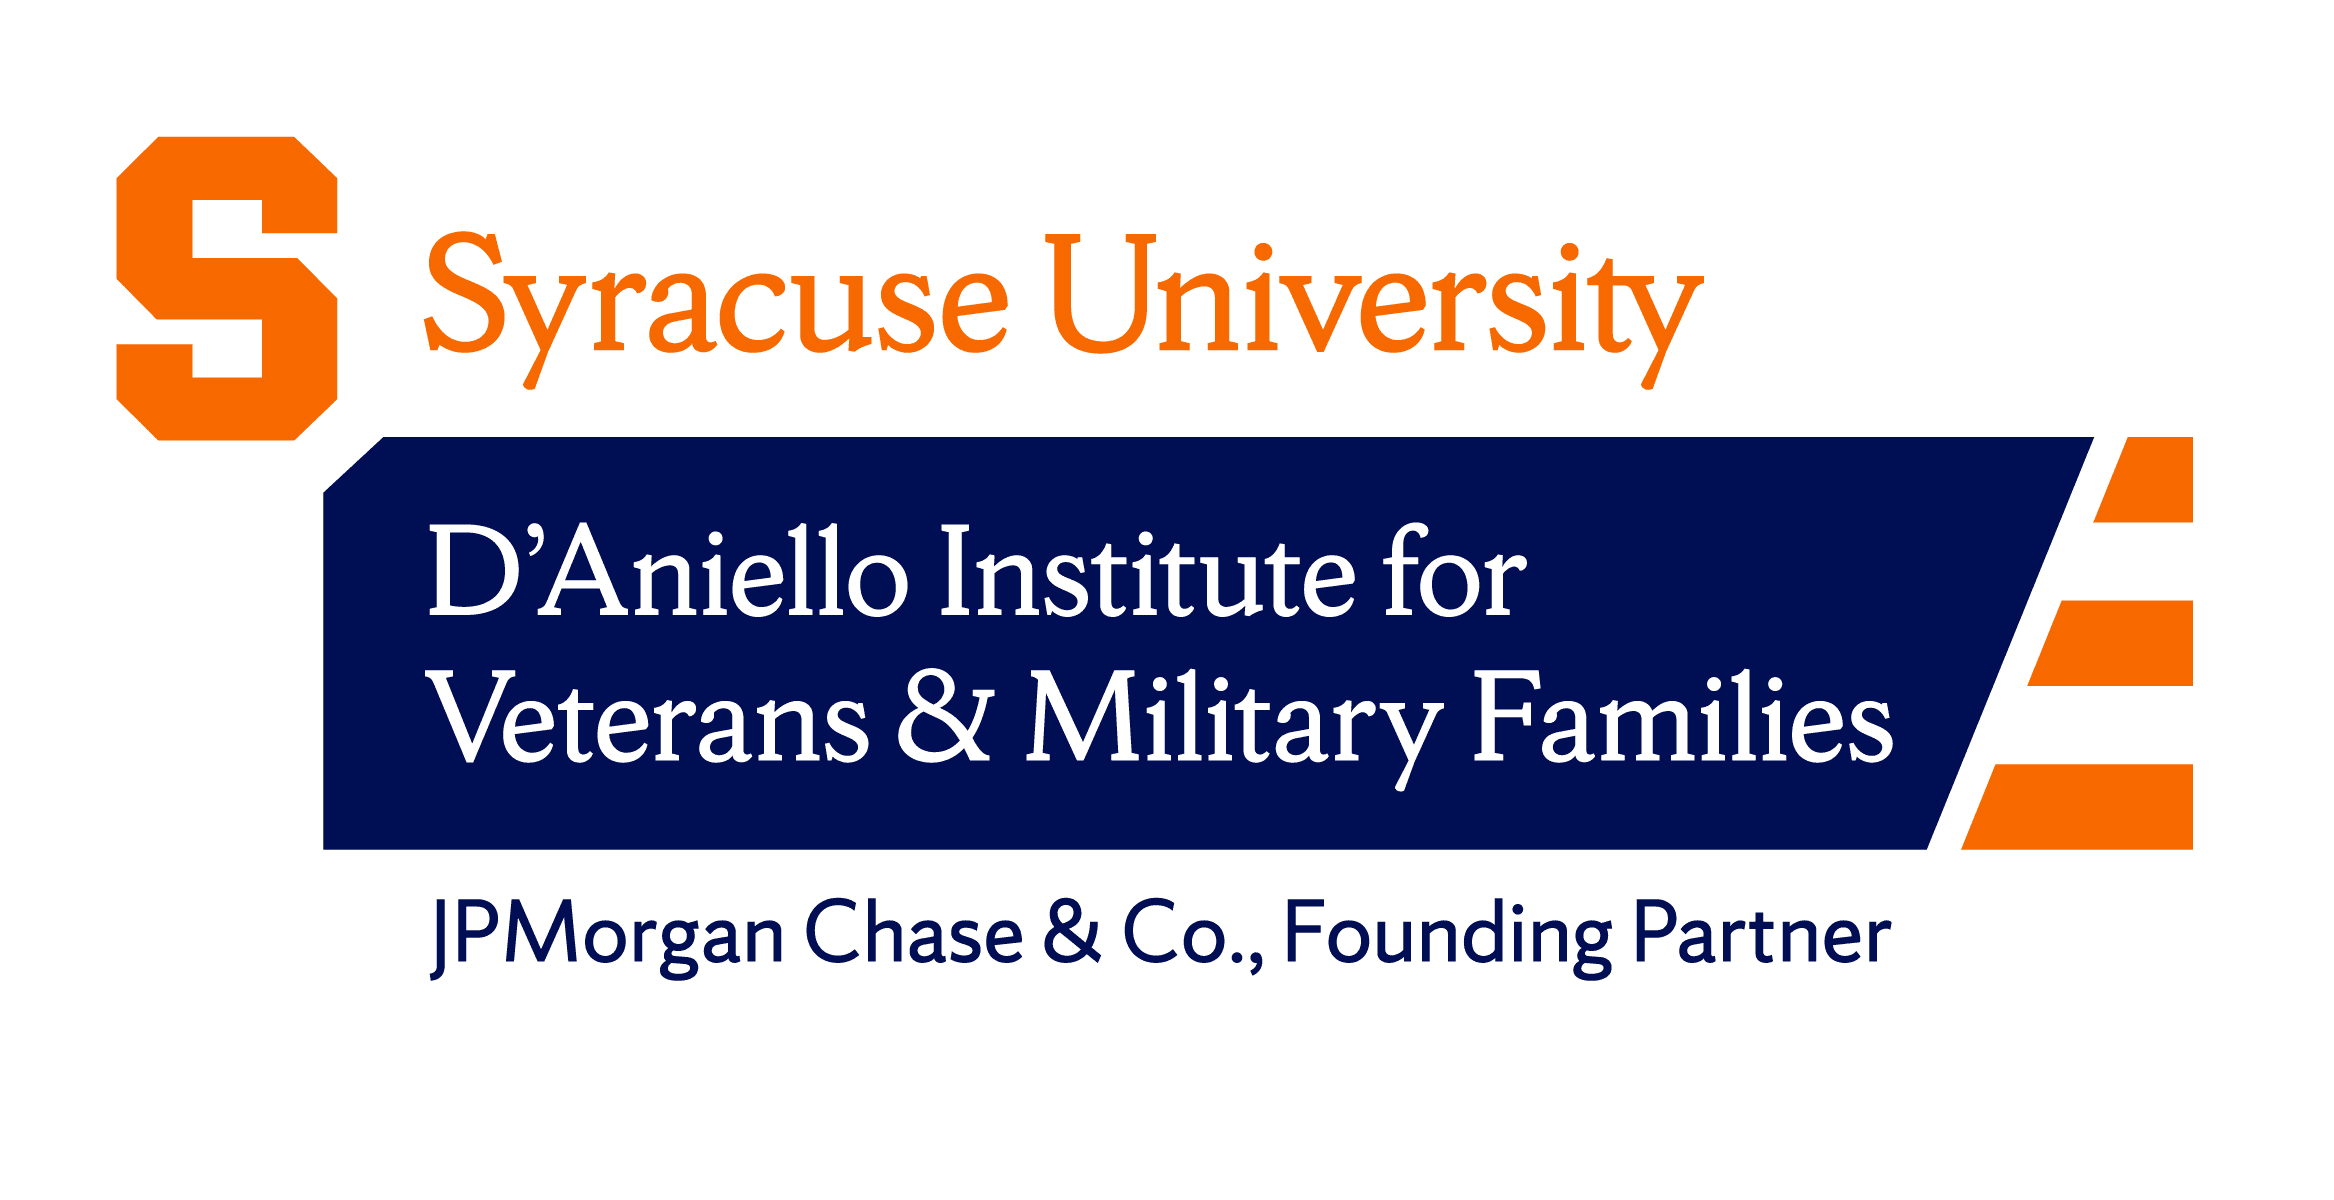 Institute for Veterans & Military Families (IVMF)